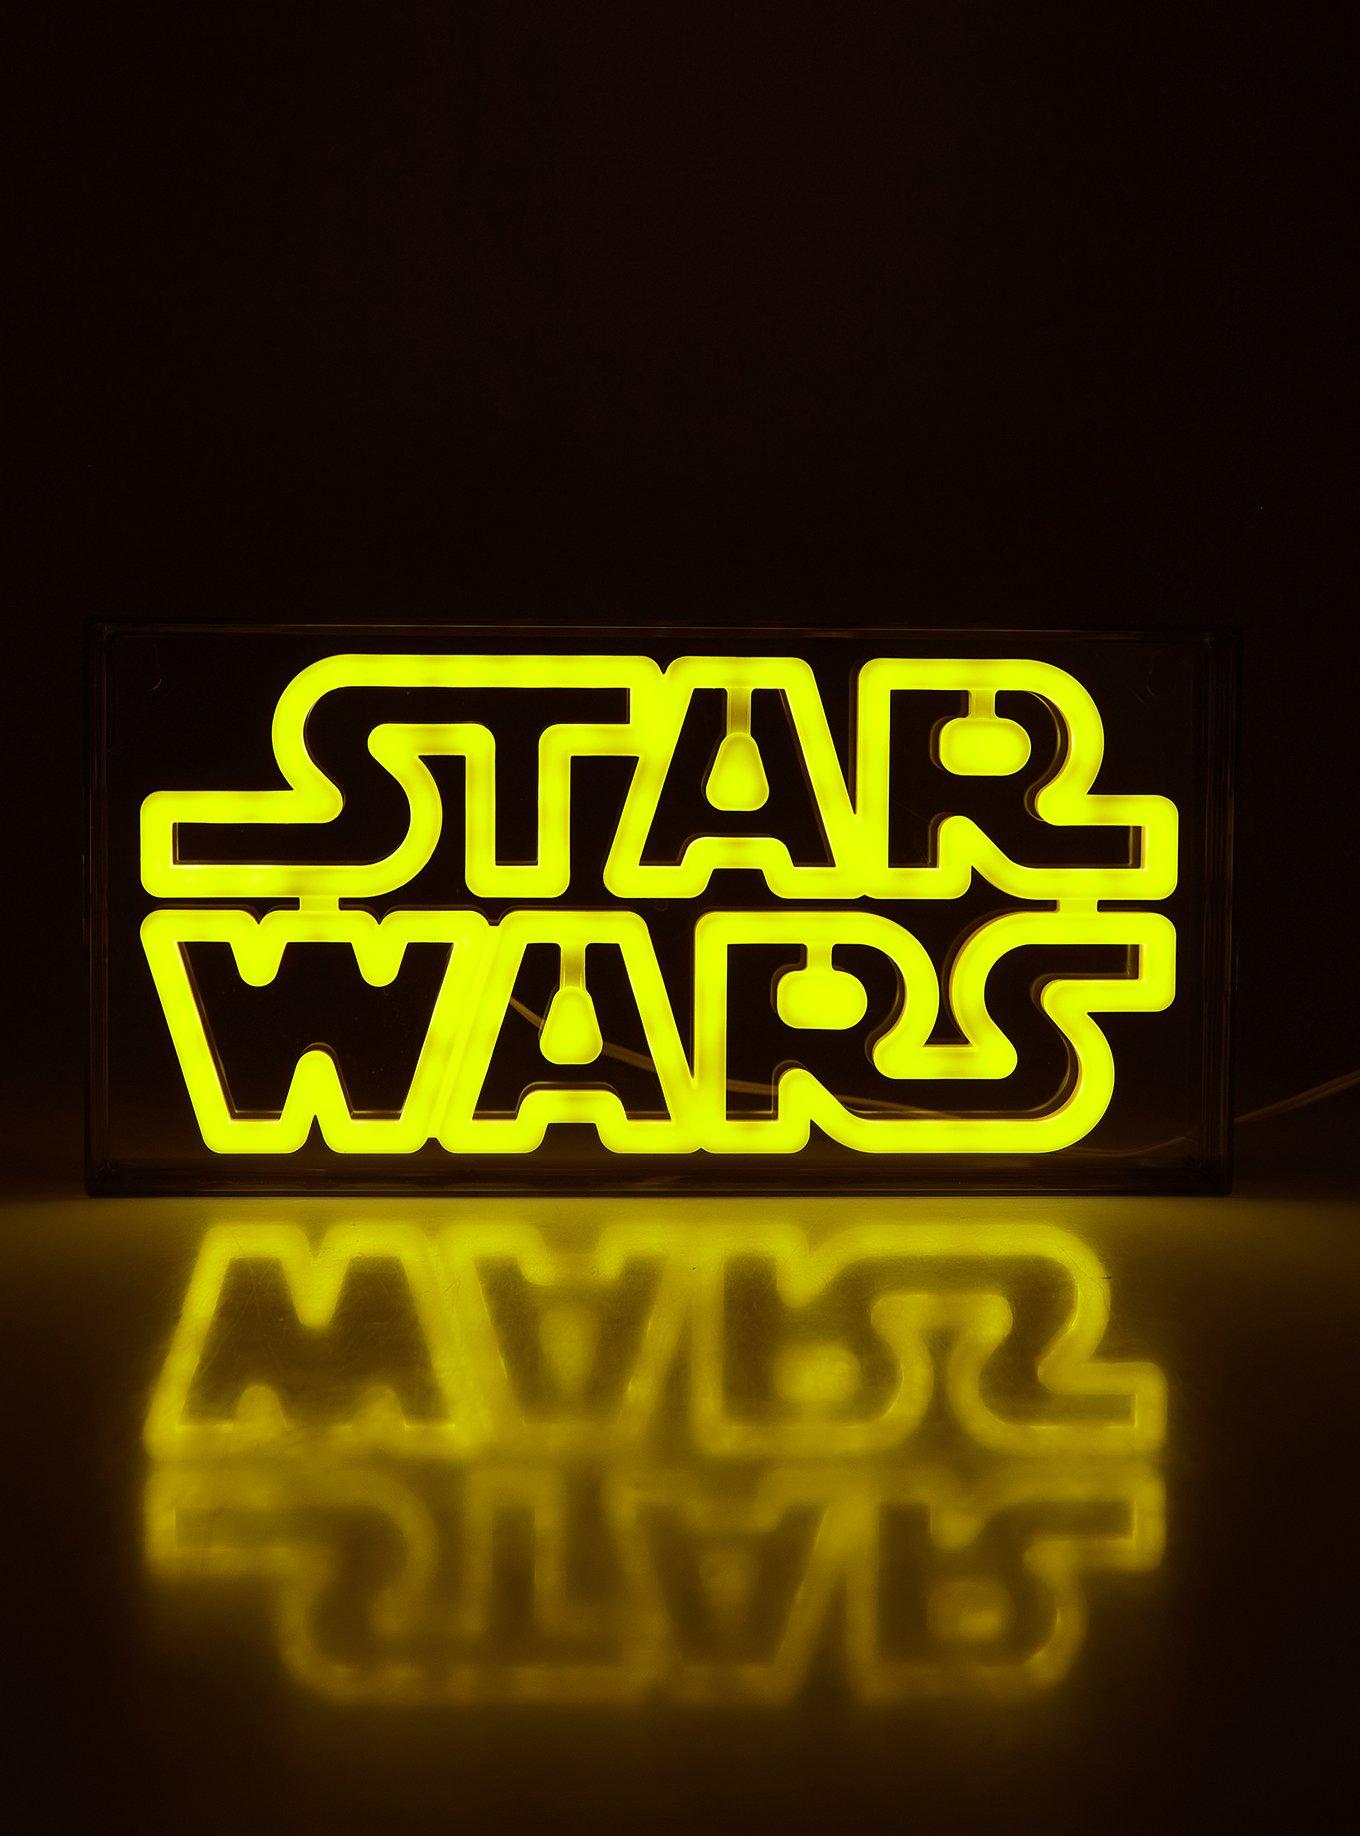 Star Wars Title Lettering LED Neon Lamp